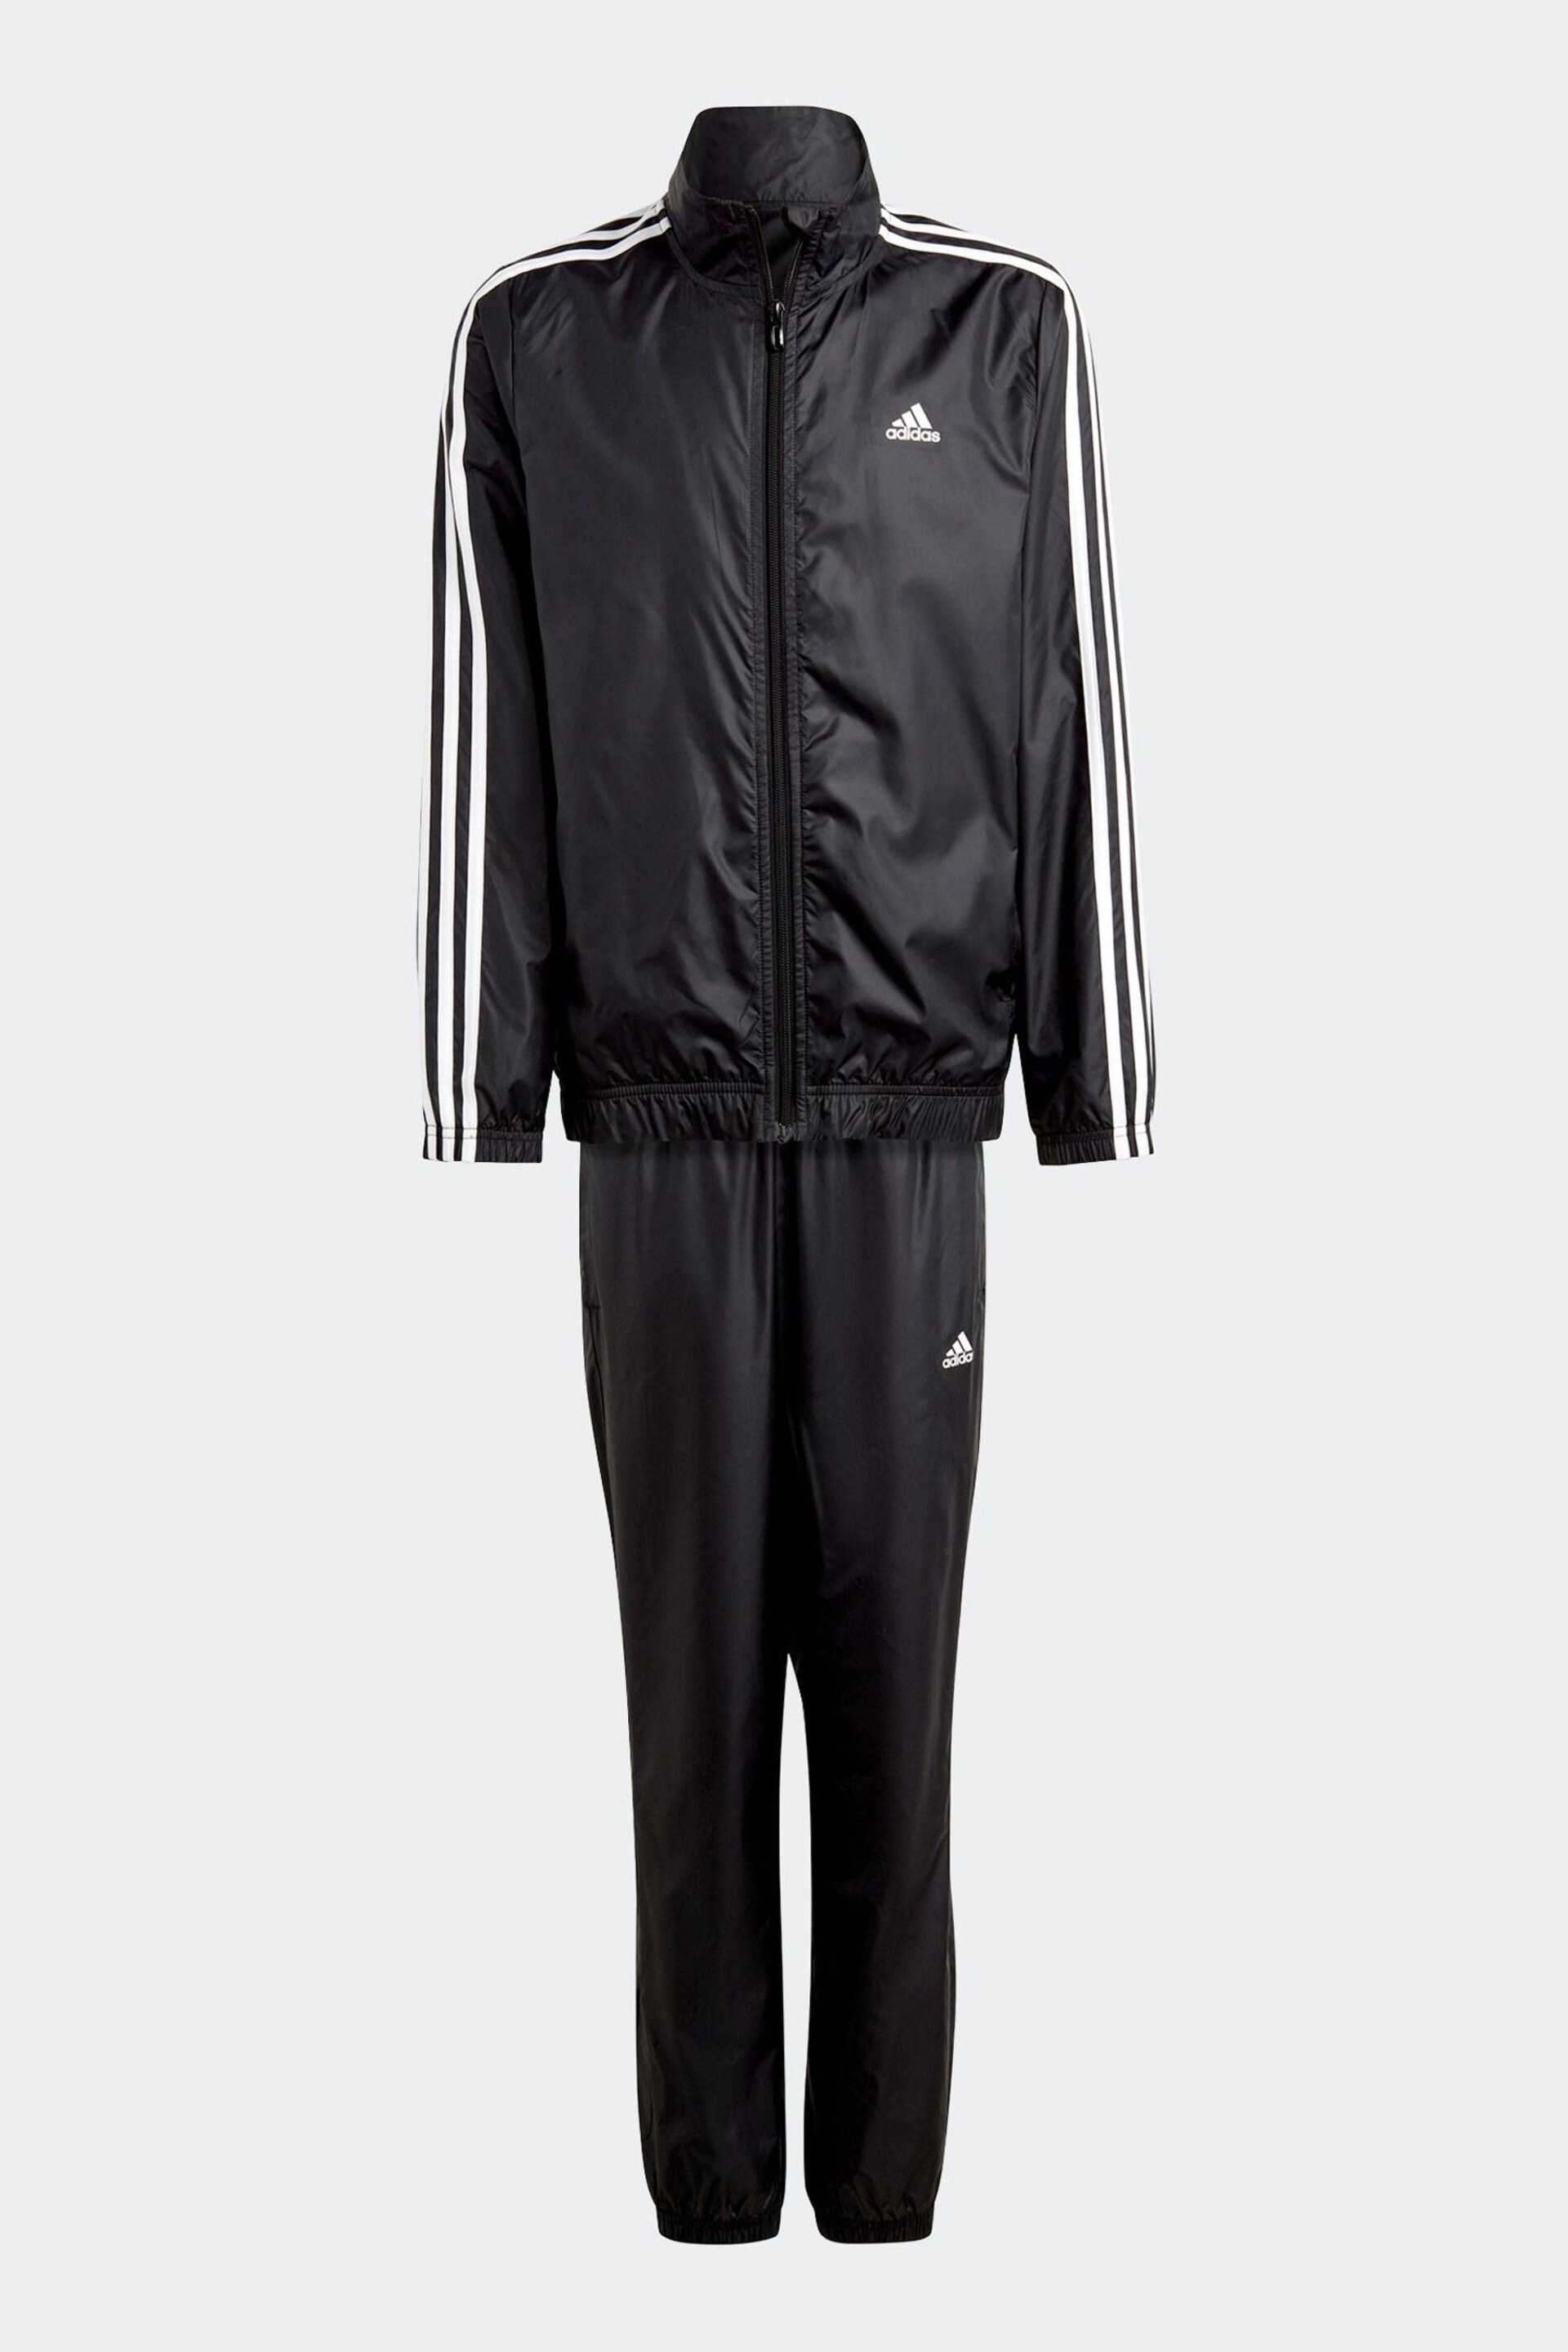 adidas Black Sportswear Essentials 3-Stripes Woven Tracksuit - Image 1 of 6